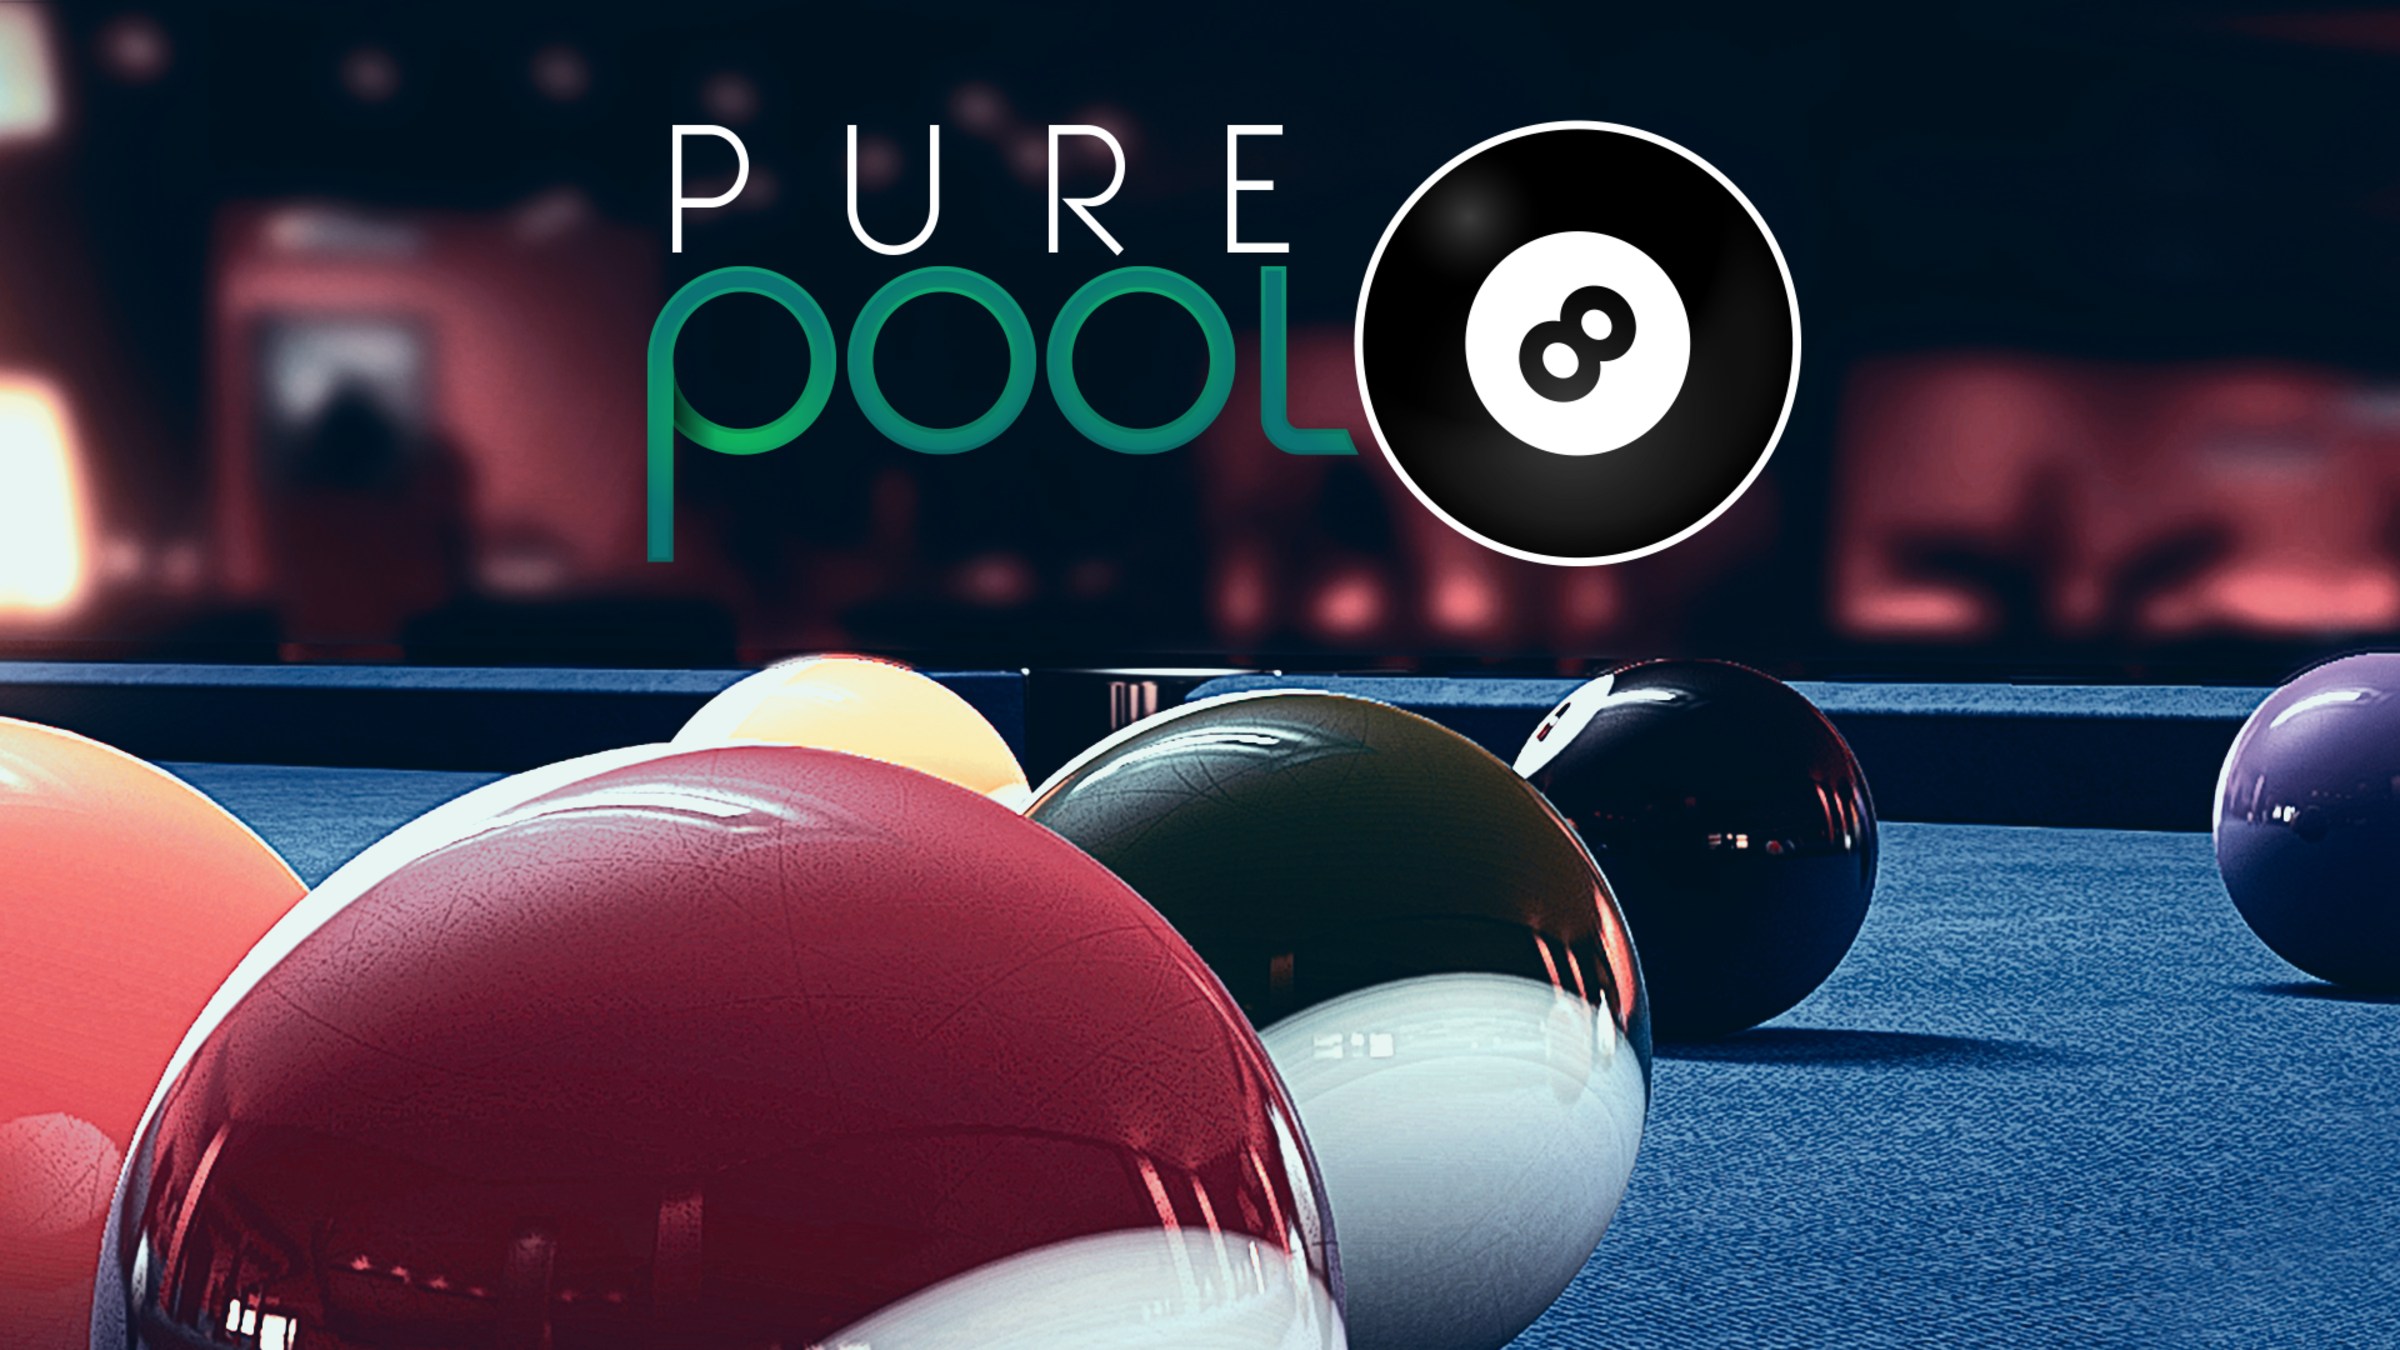 Pure Pool for Nintendo Switch